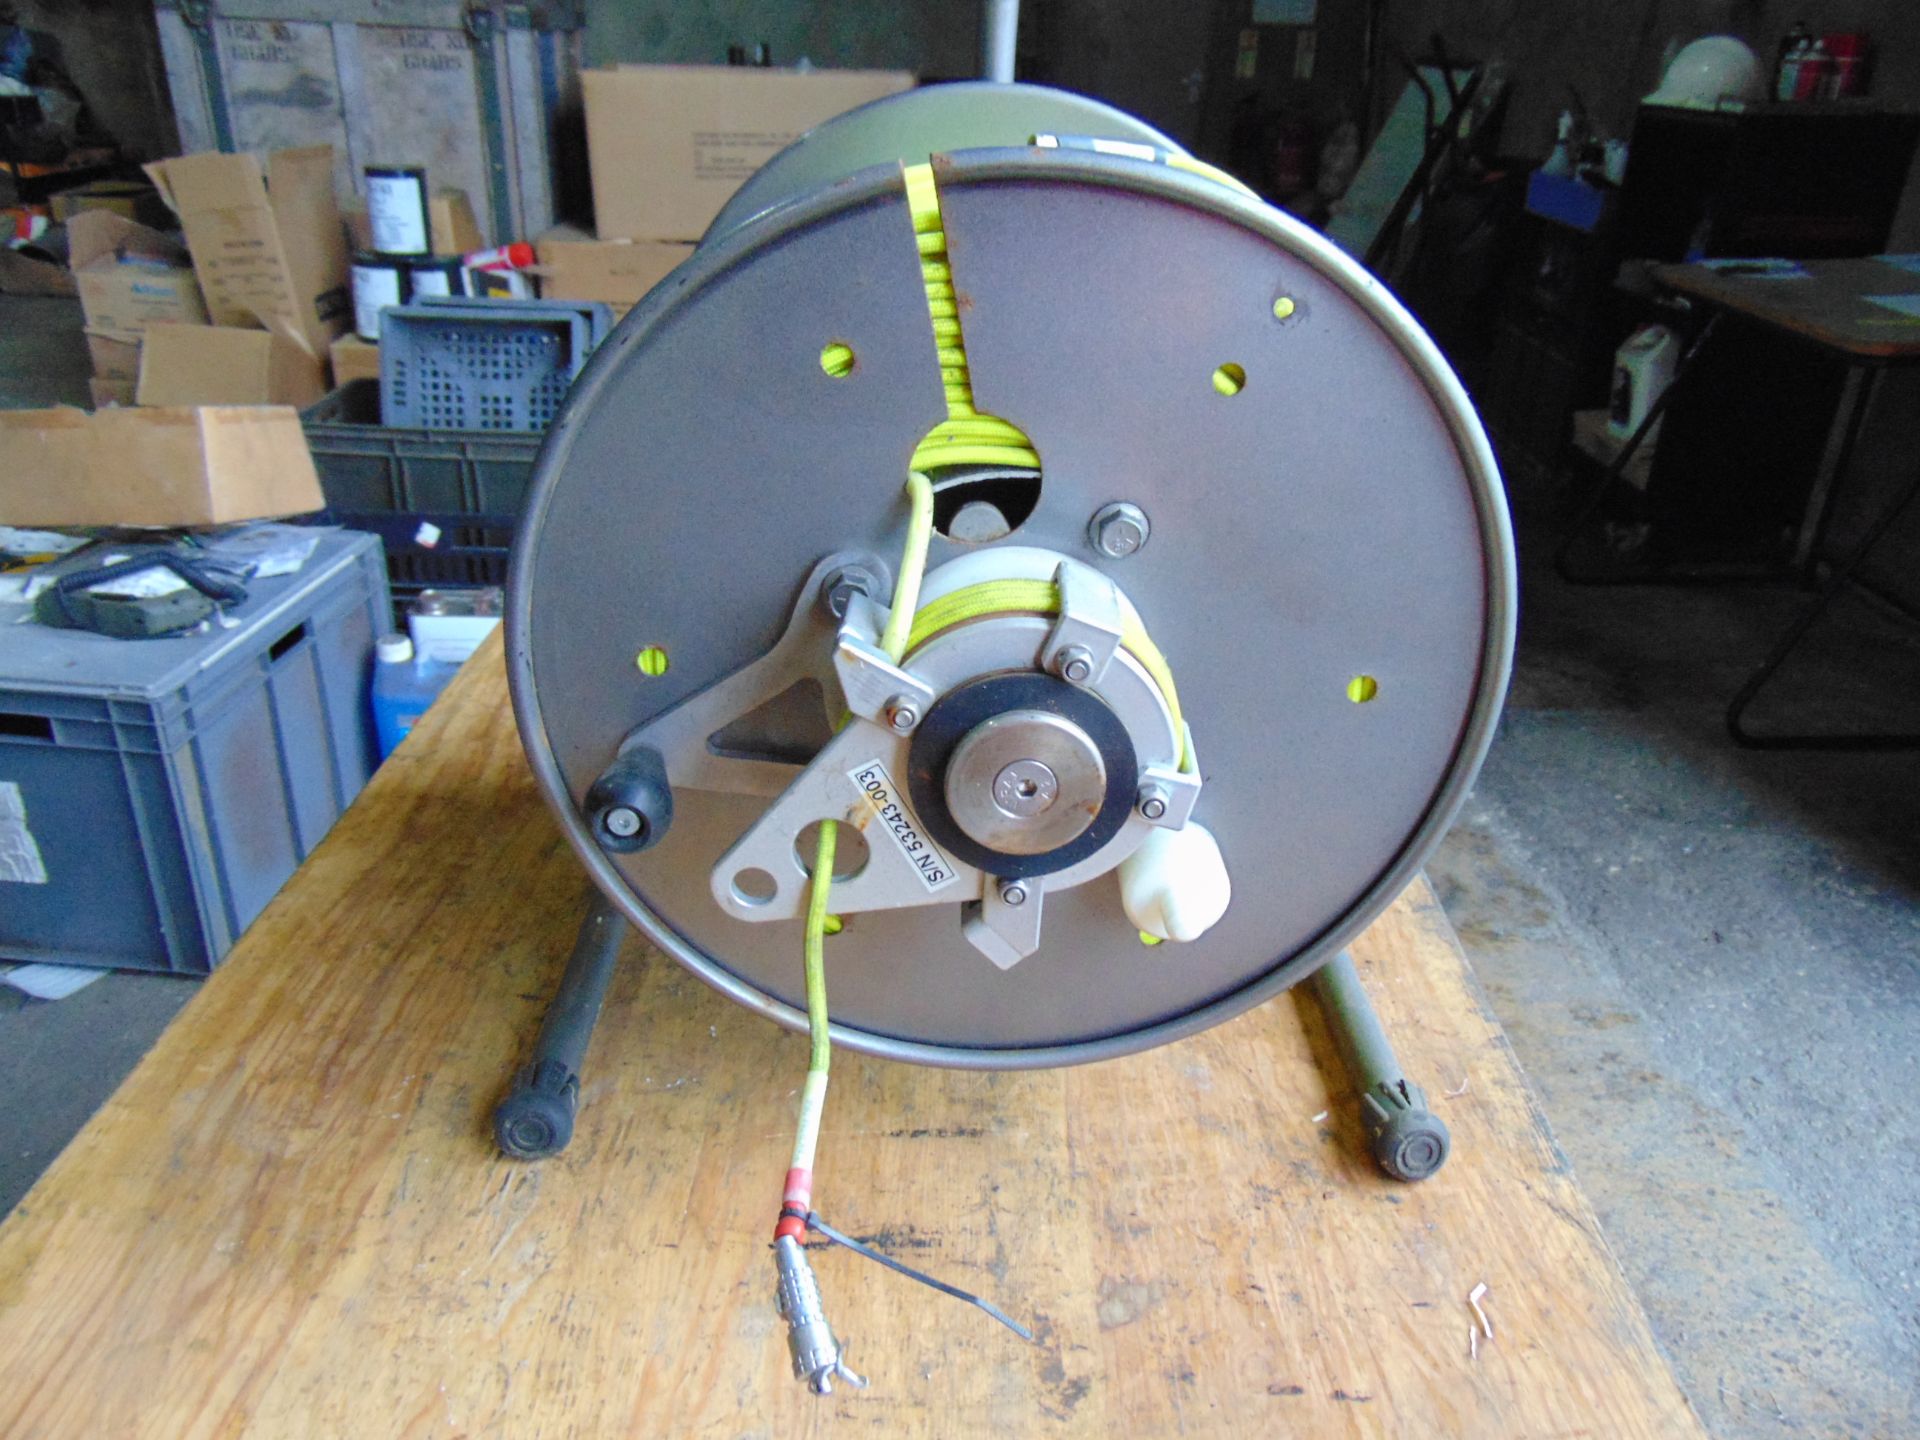 New Unissued Hannay C20-14-16 Auto Cable Reel c/w Cable - Image 3 of 8